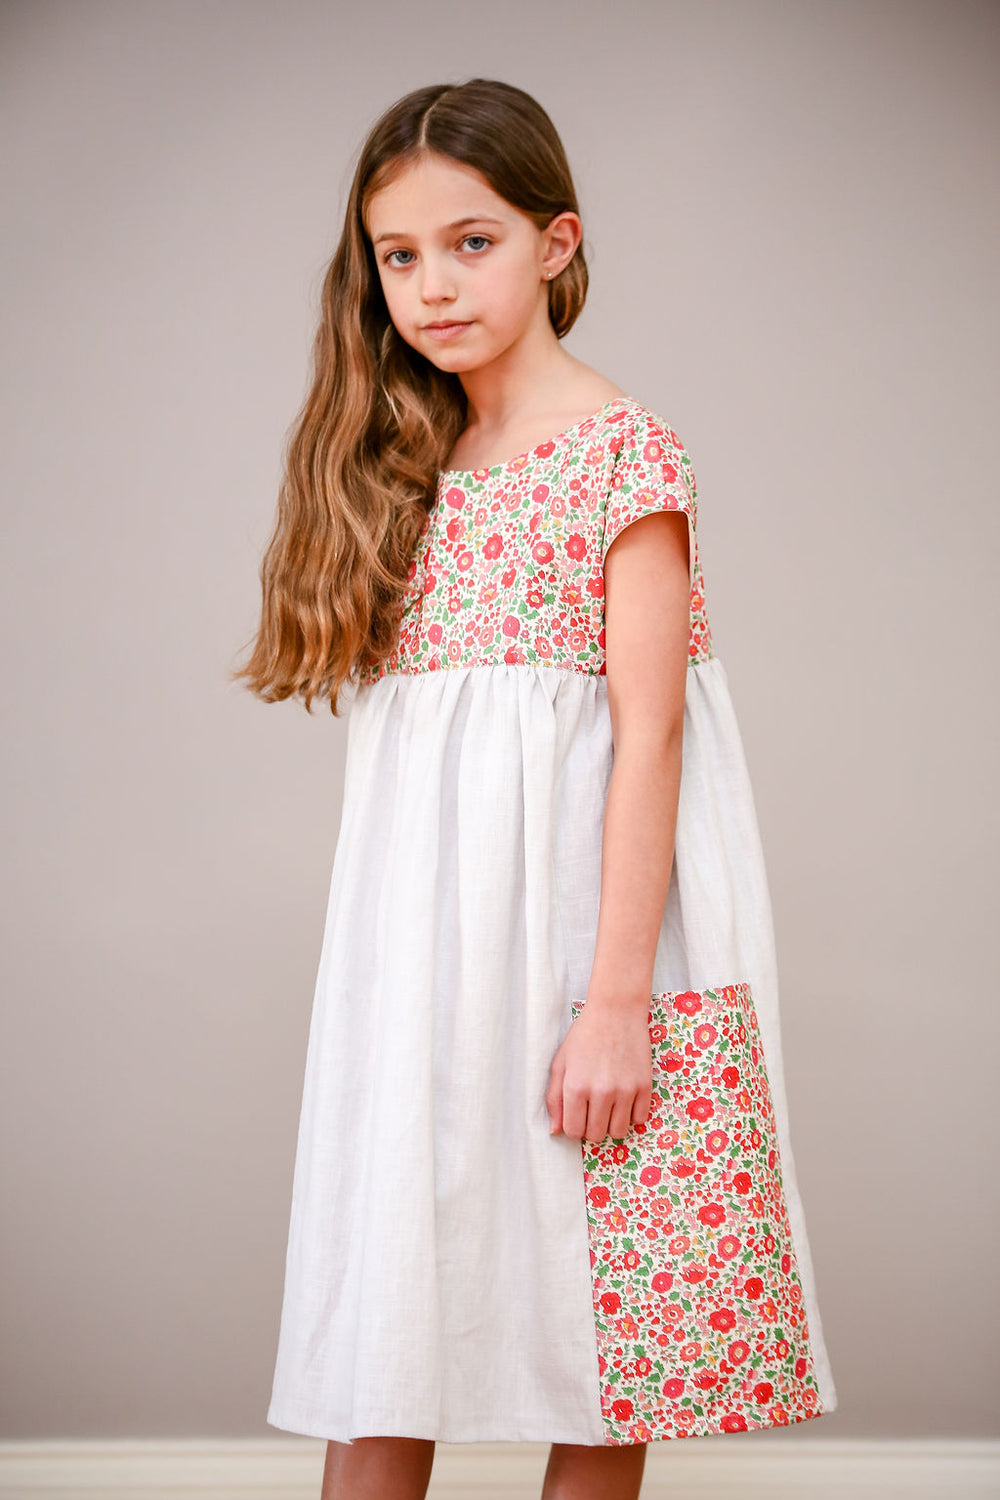 Child wearing the Children's Portobello Pocket Dress sewing pattern by Greyfriars and Grace. A dress pattern made in cotton, linen or cotton/linen blend fabric for dress and lining, featuring a relaxed fit, two large side pockets and a button back closure